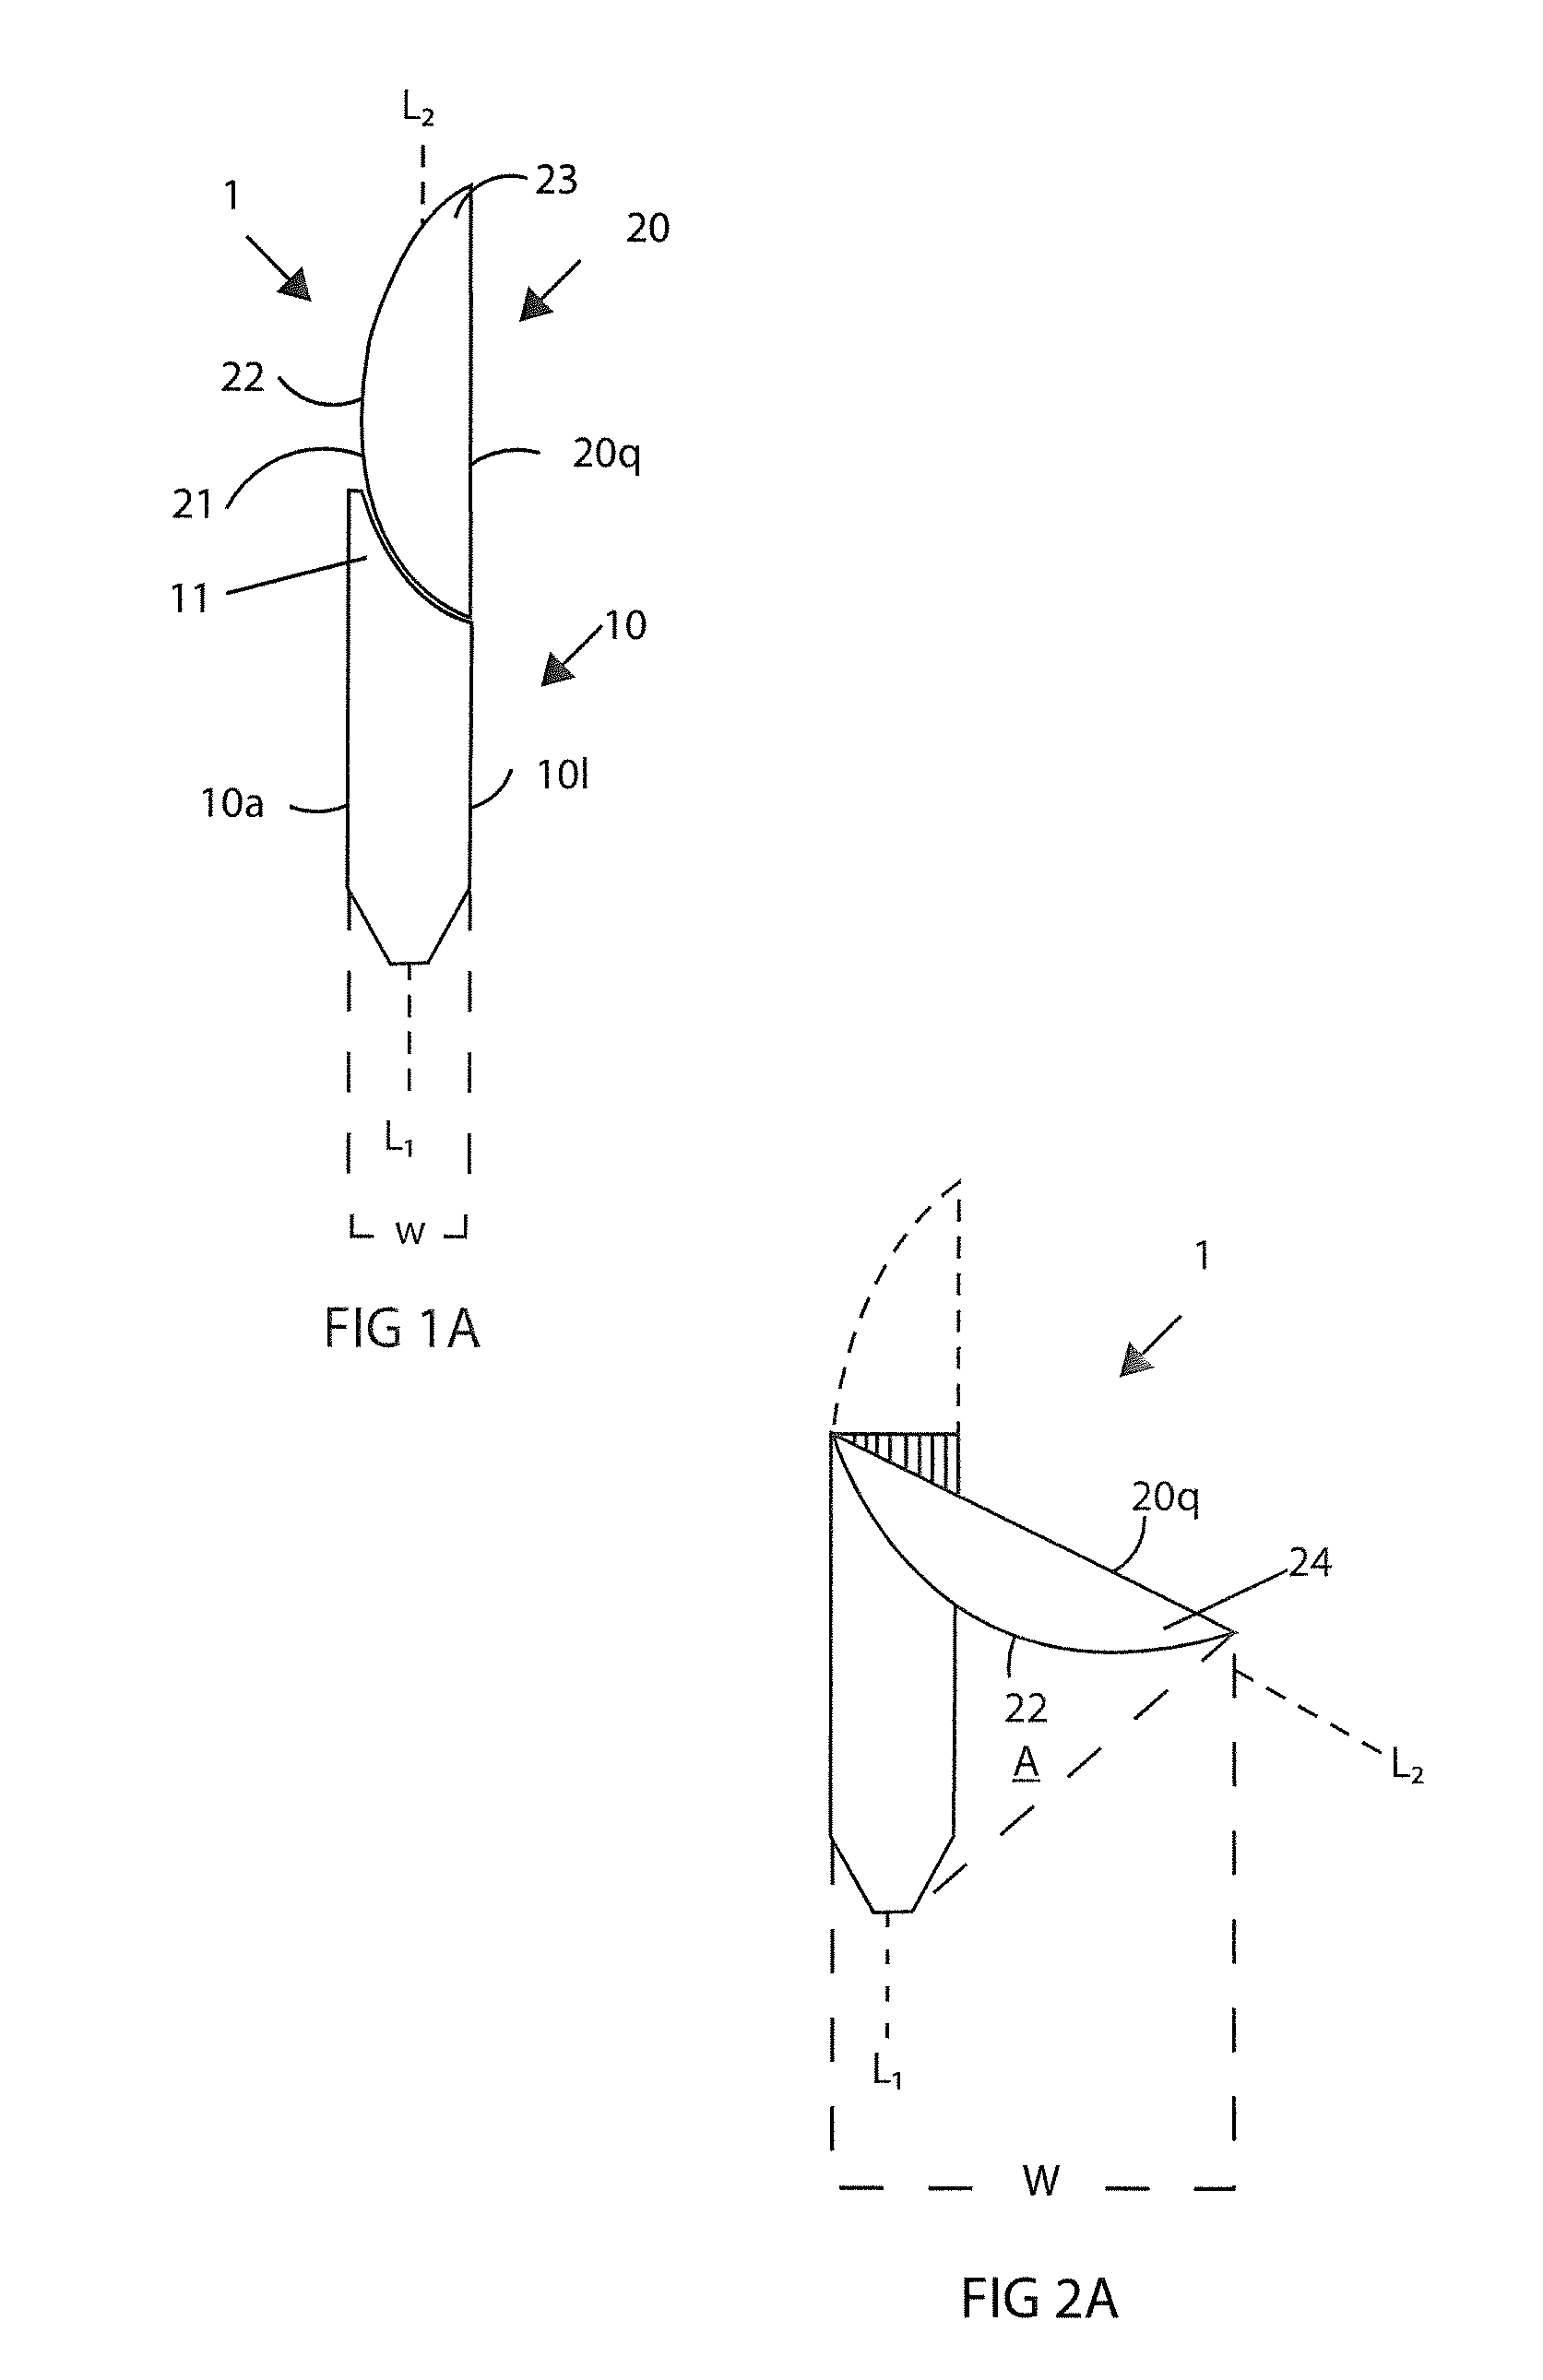 Expandable intervertebral device, and systems and methods for inserting same